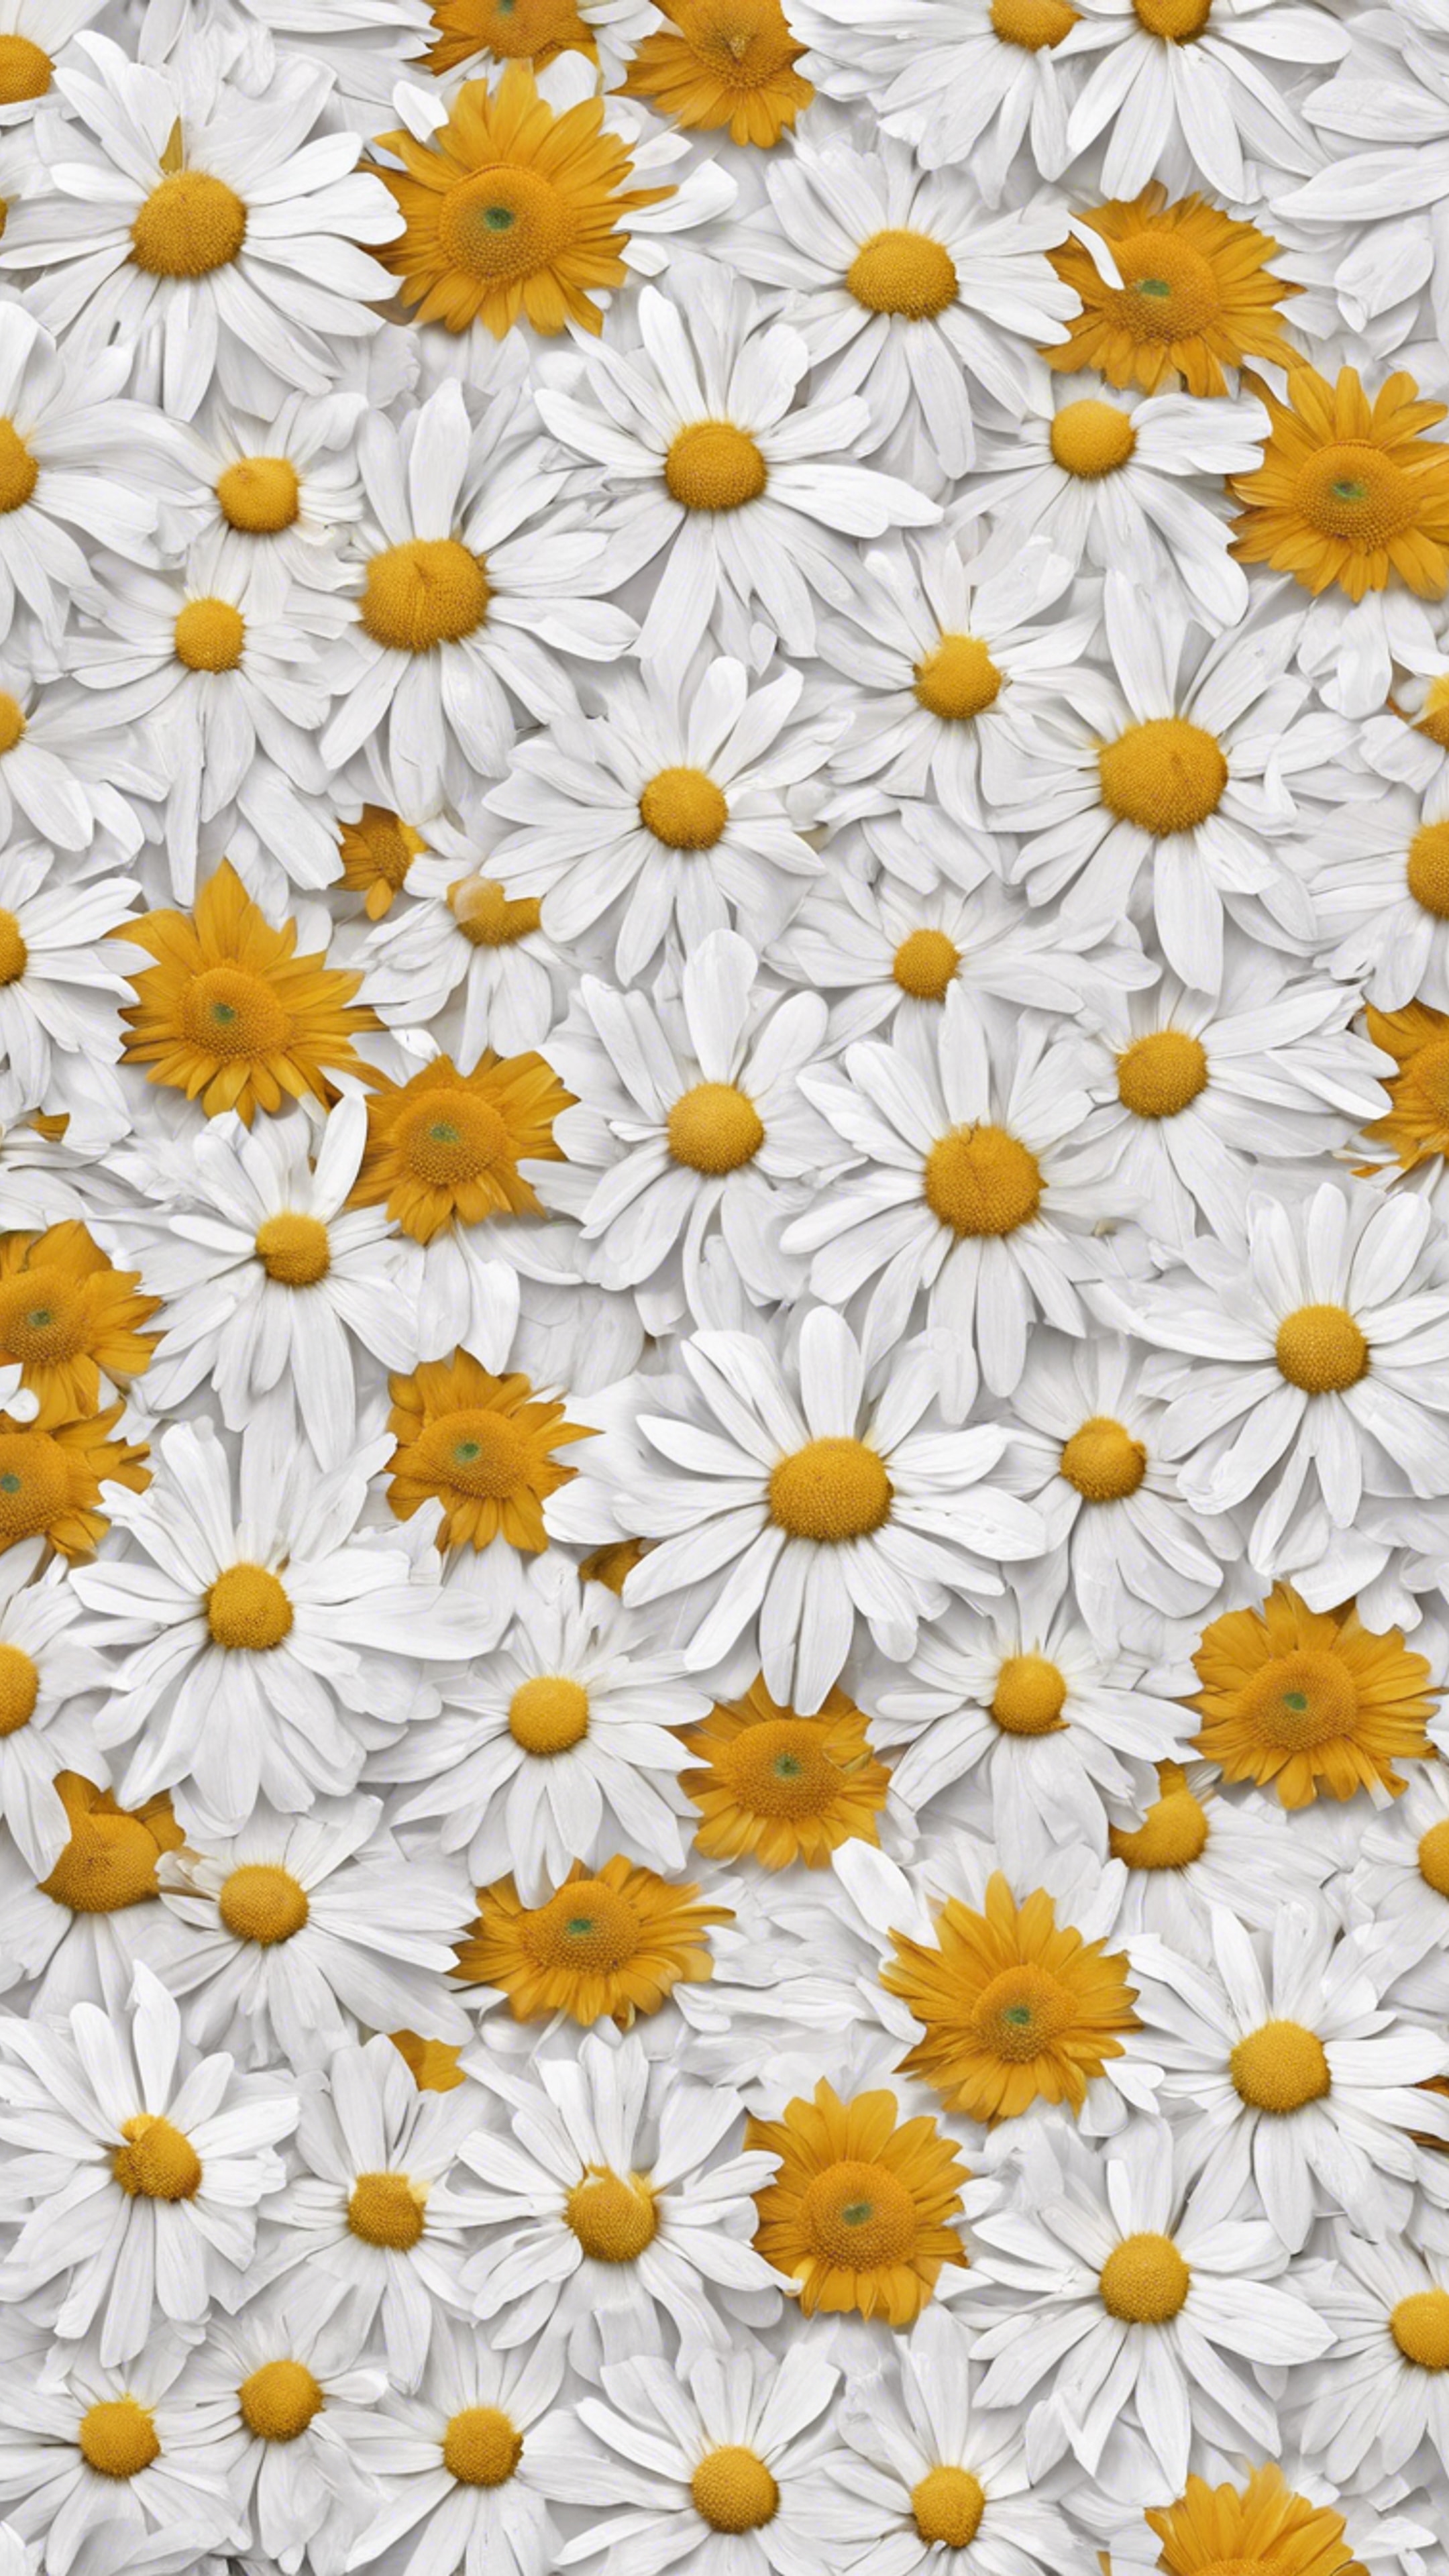 A minimalist floral pattern featuring stylized daisies on a white background.壁紙[c284160dfd42447daf98]